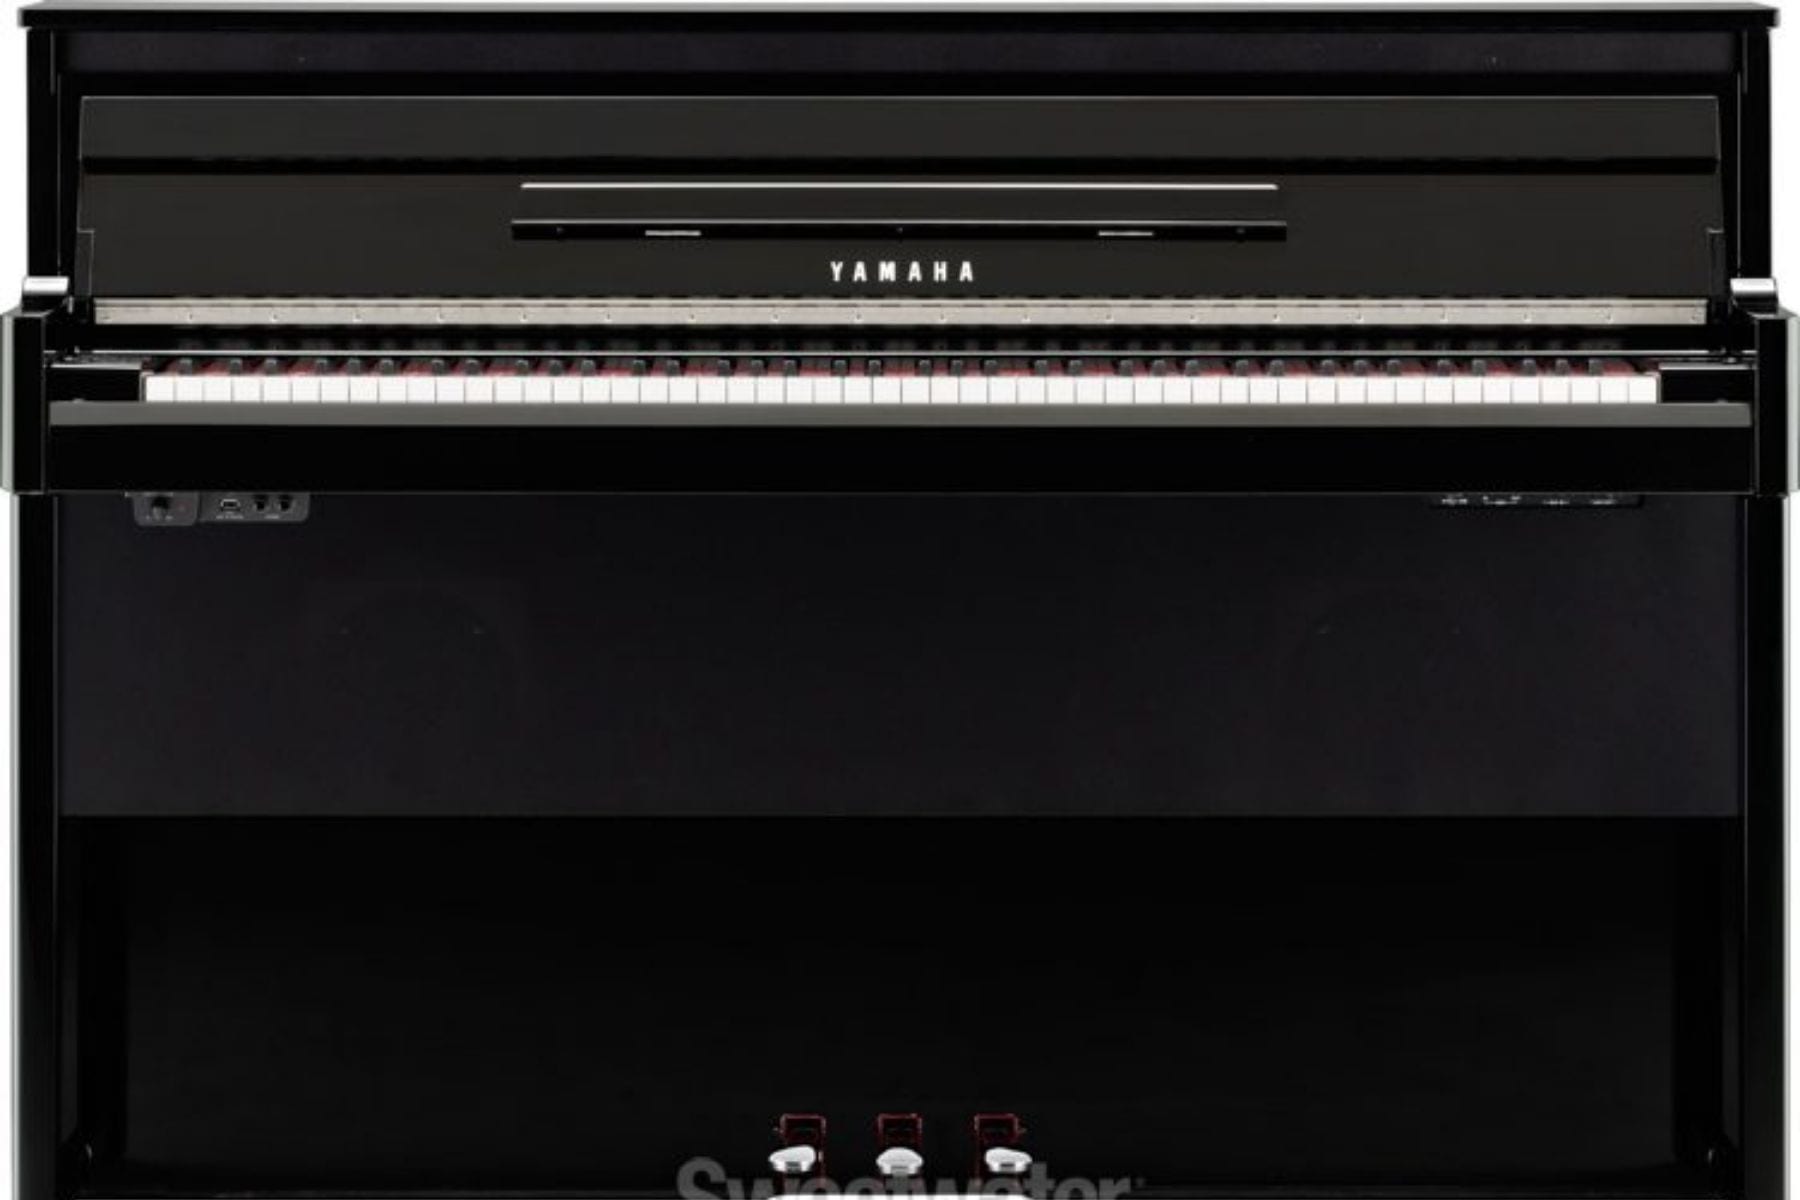 Standard Upright Piano (Digital only)